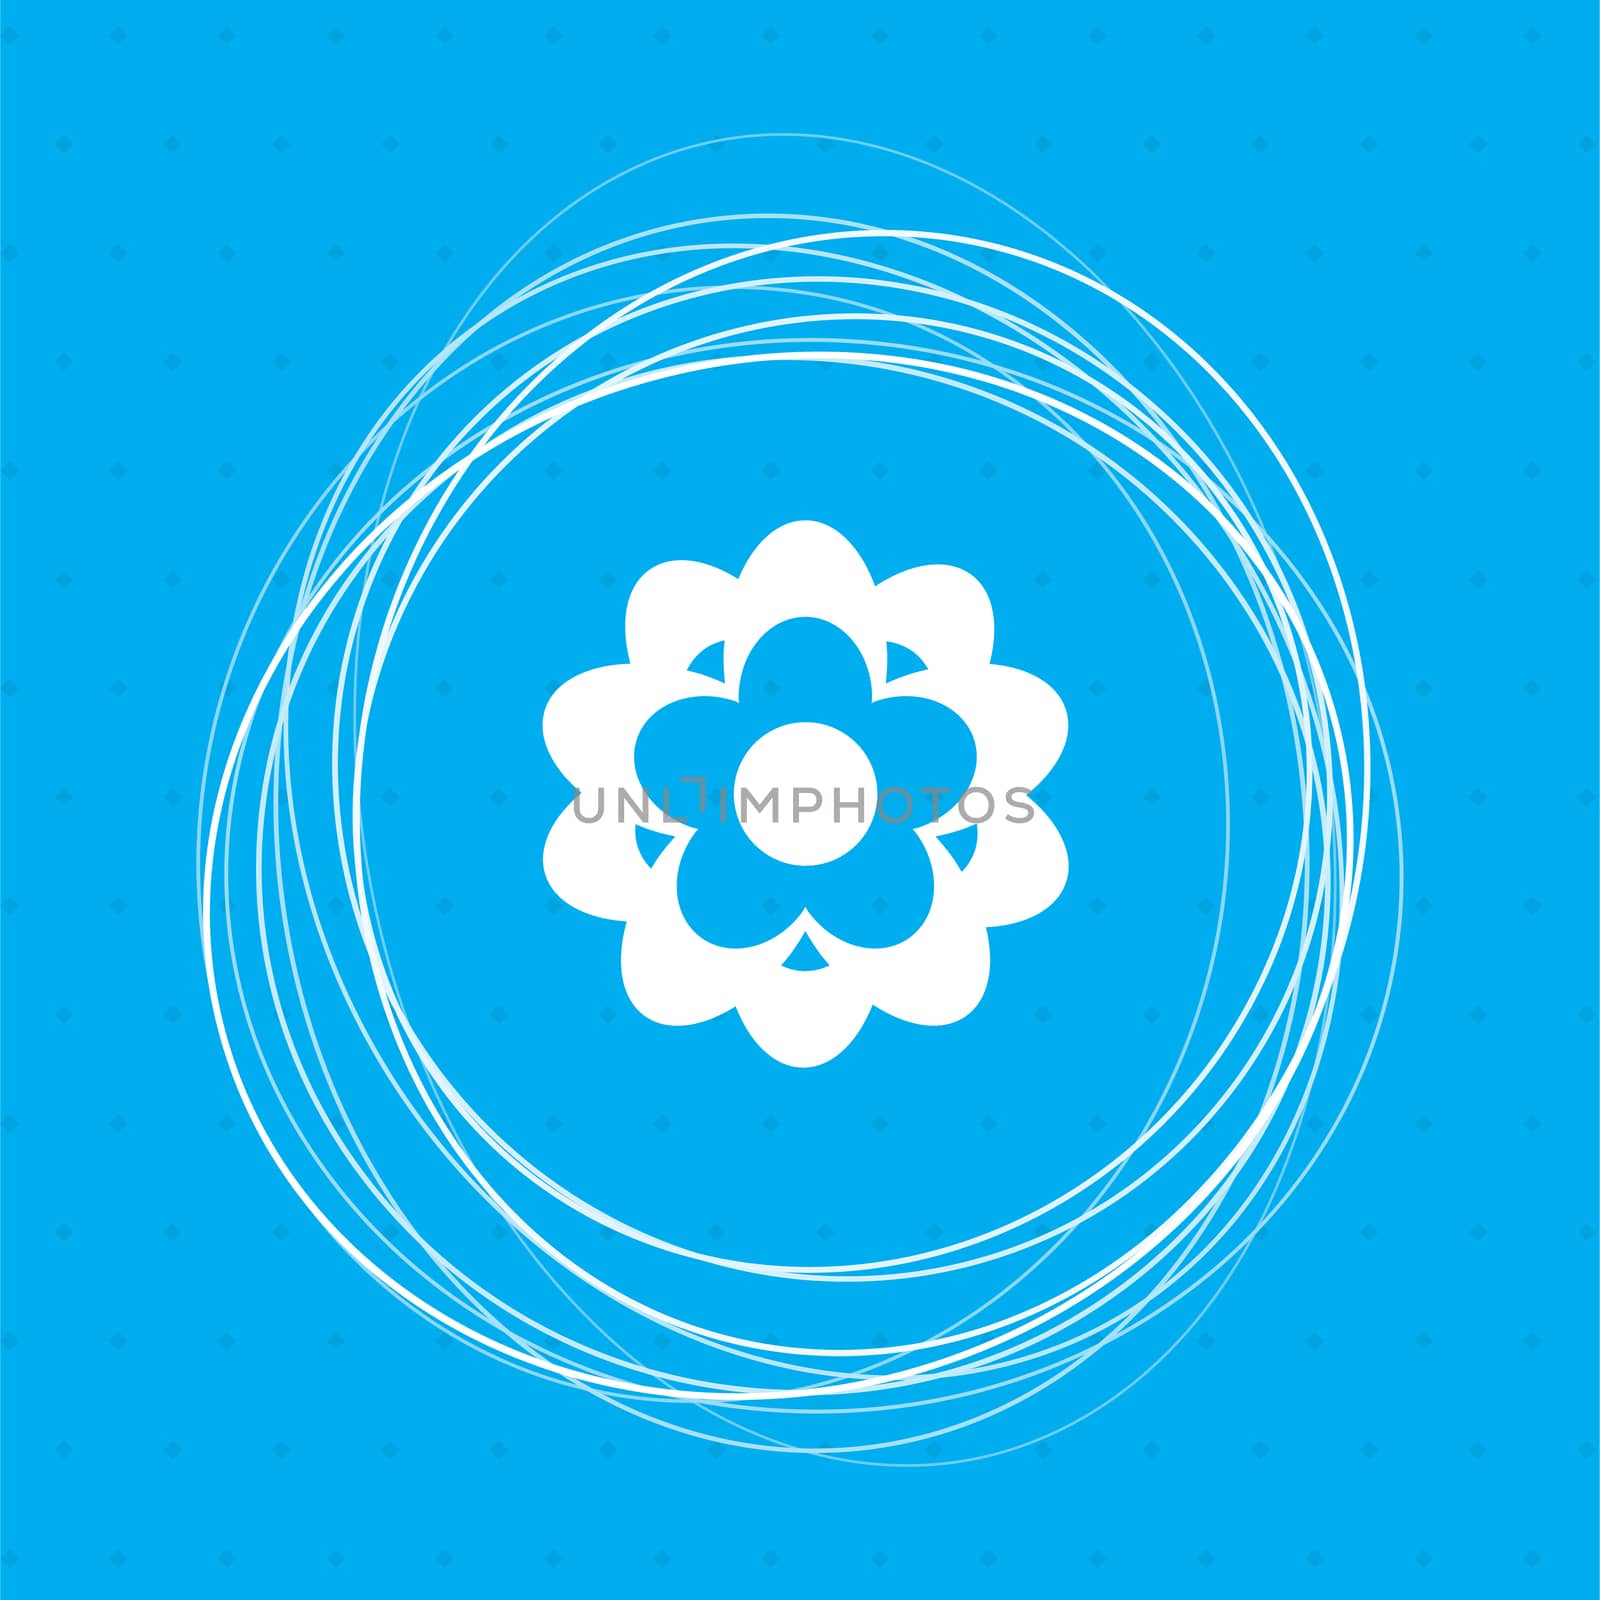 flower icon on a blue background with abstract circles around and place for your text. illustration